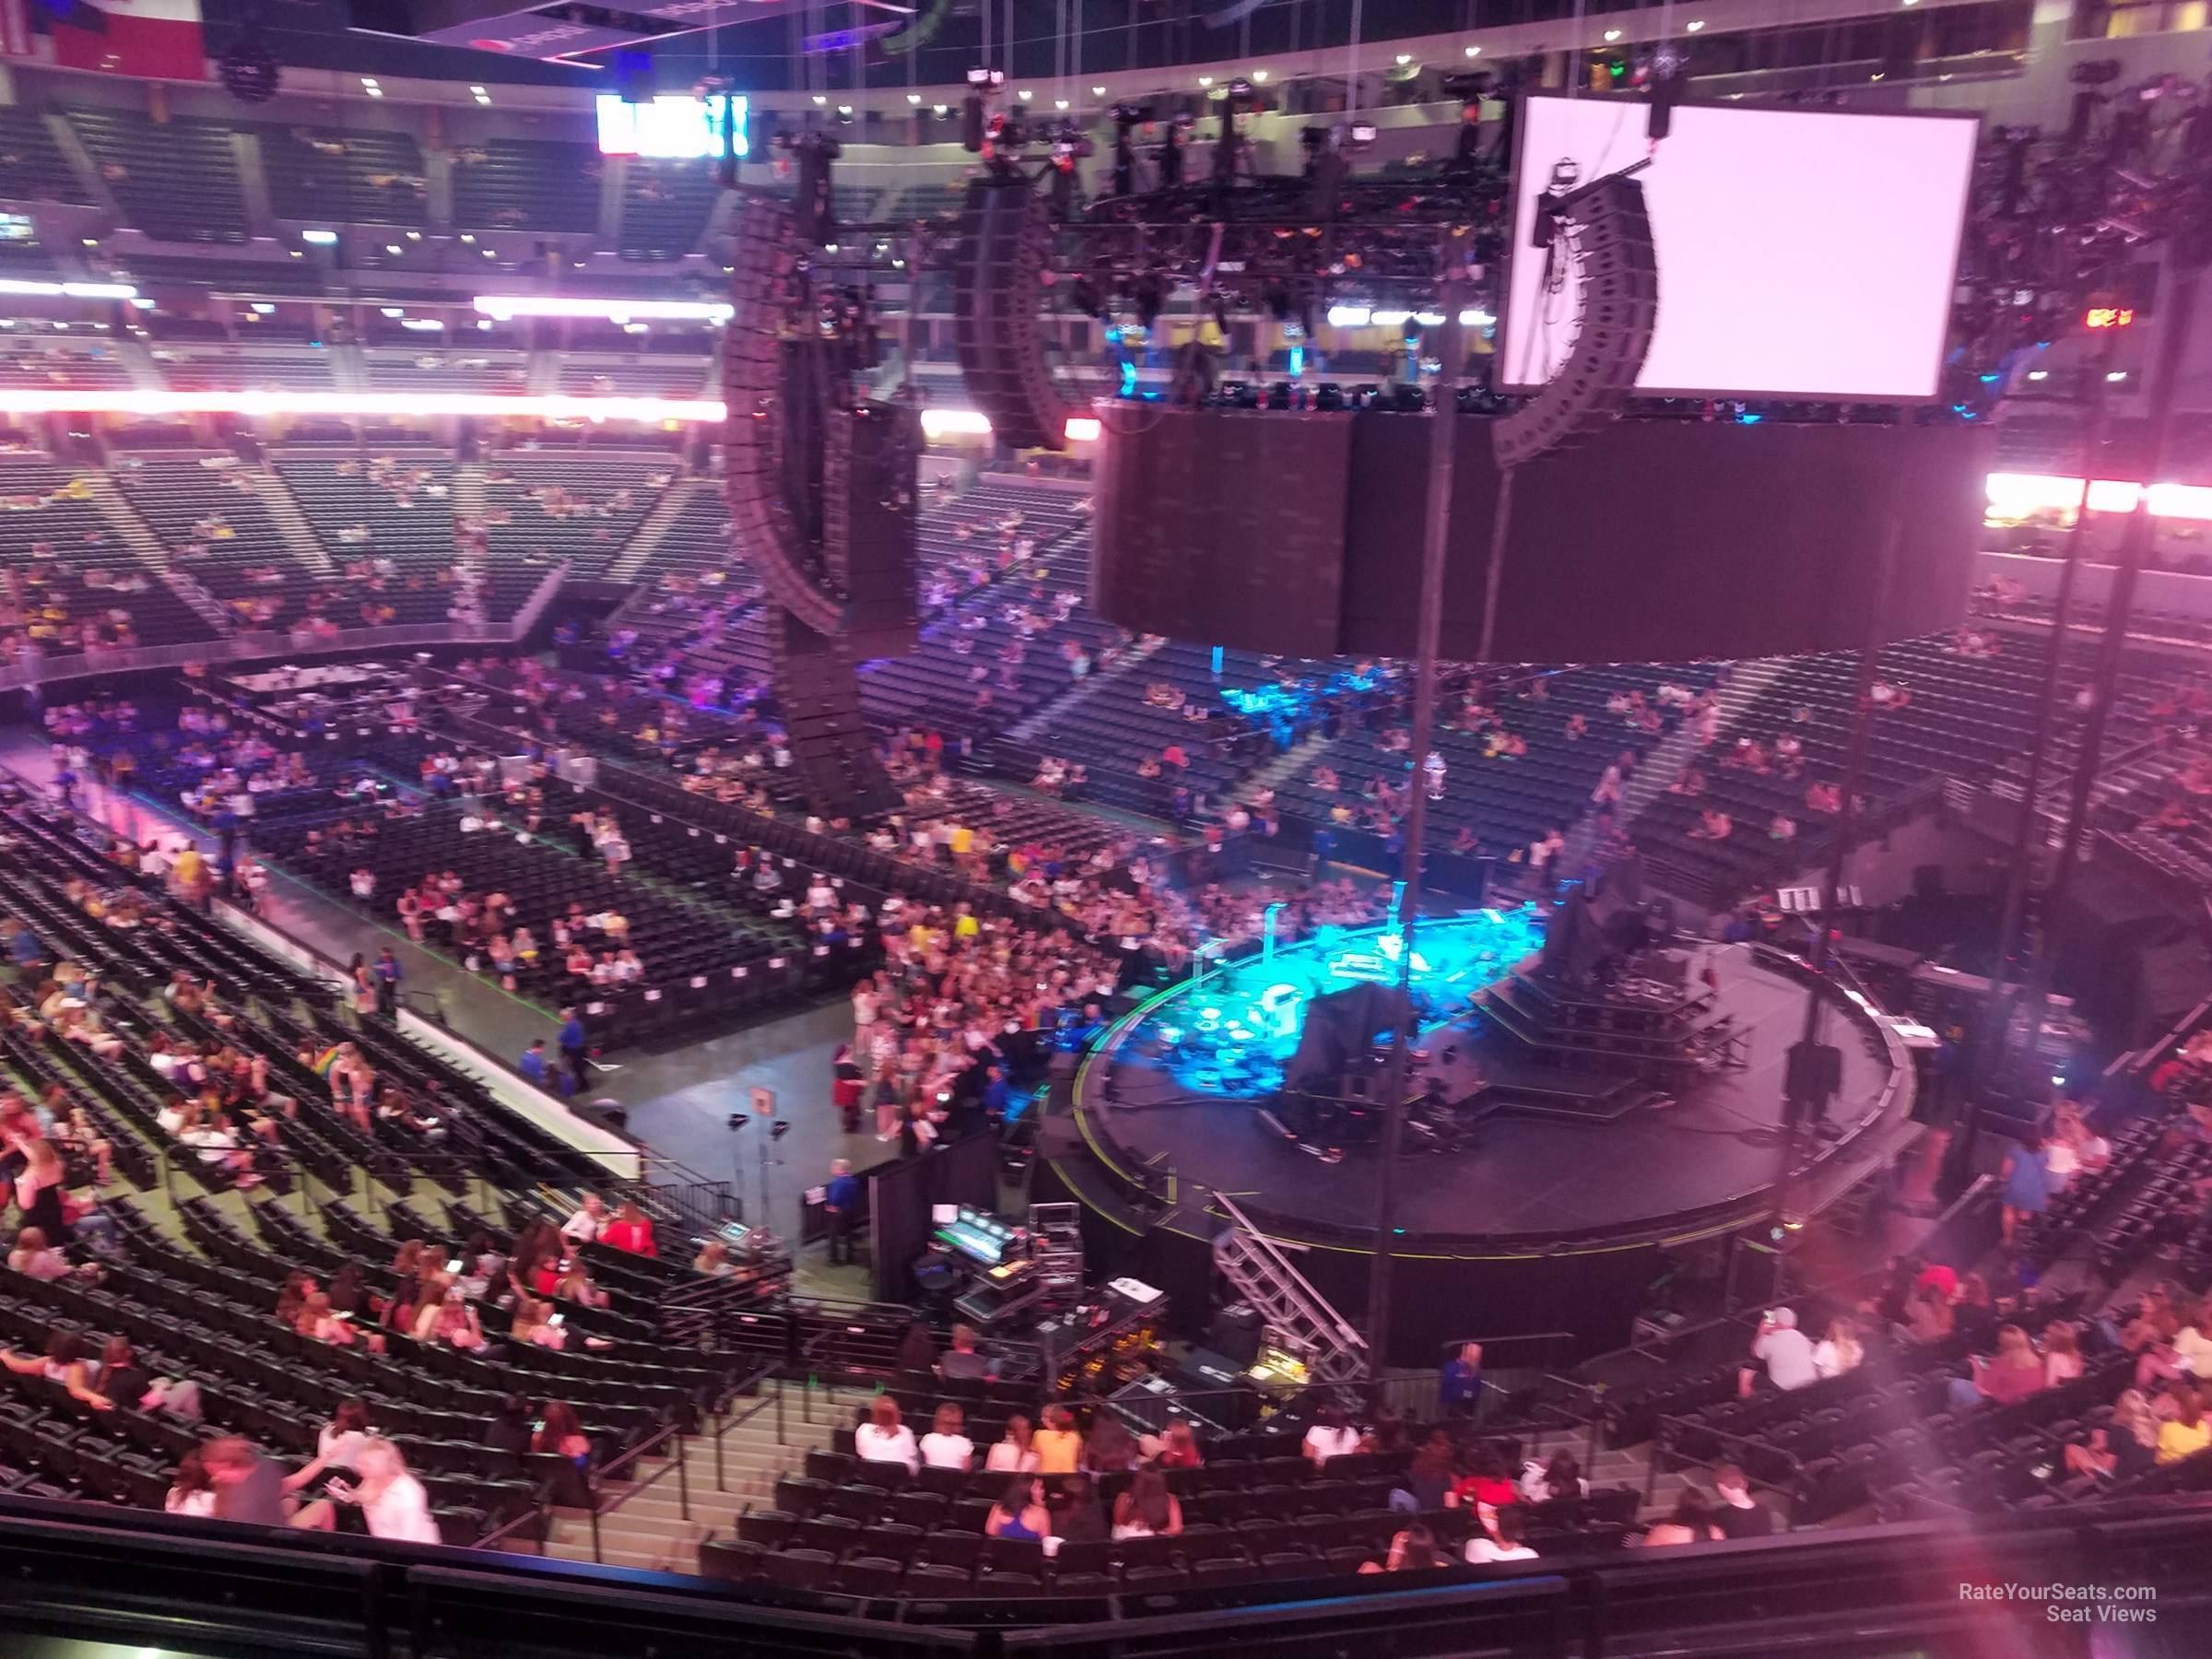 section 252, row 4 seat view  for concert - ball arena